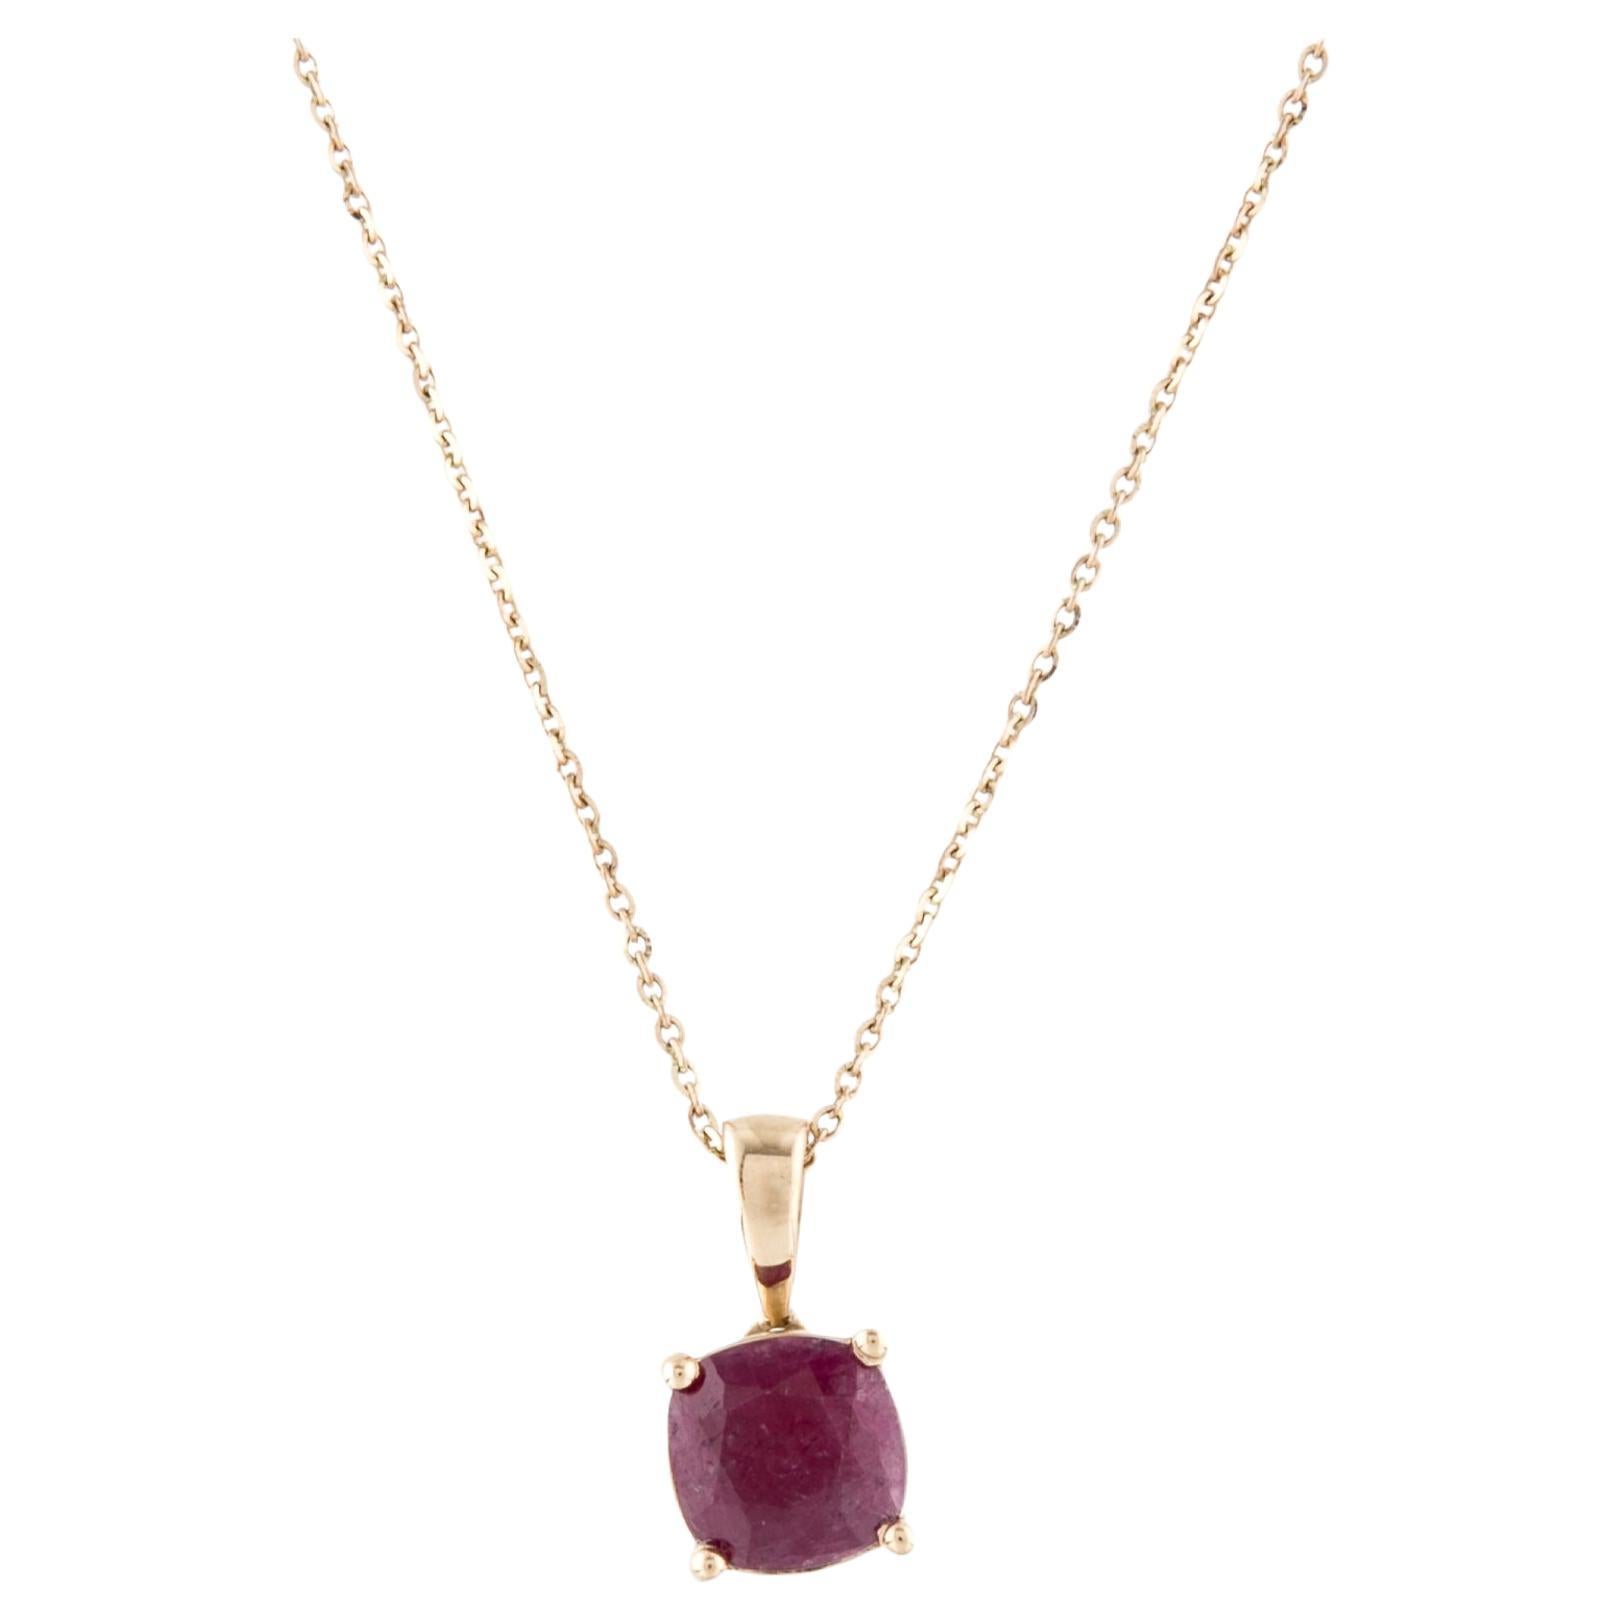 Gorgeous 14K Ruby Pendant Necklace  2.08ct Sparkling Gemstone Statement Piece For Sale